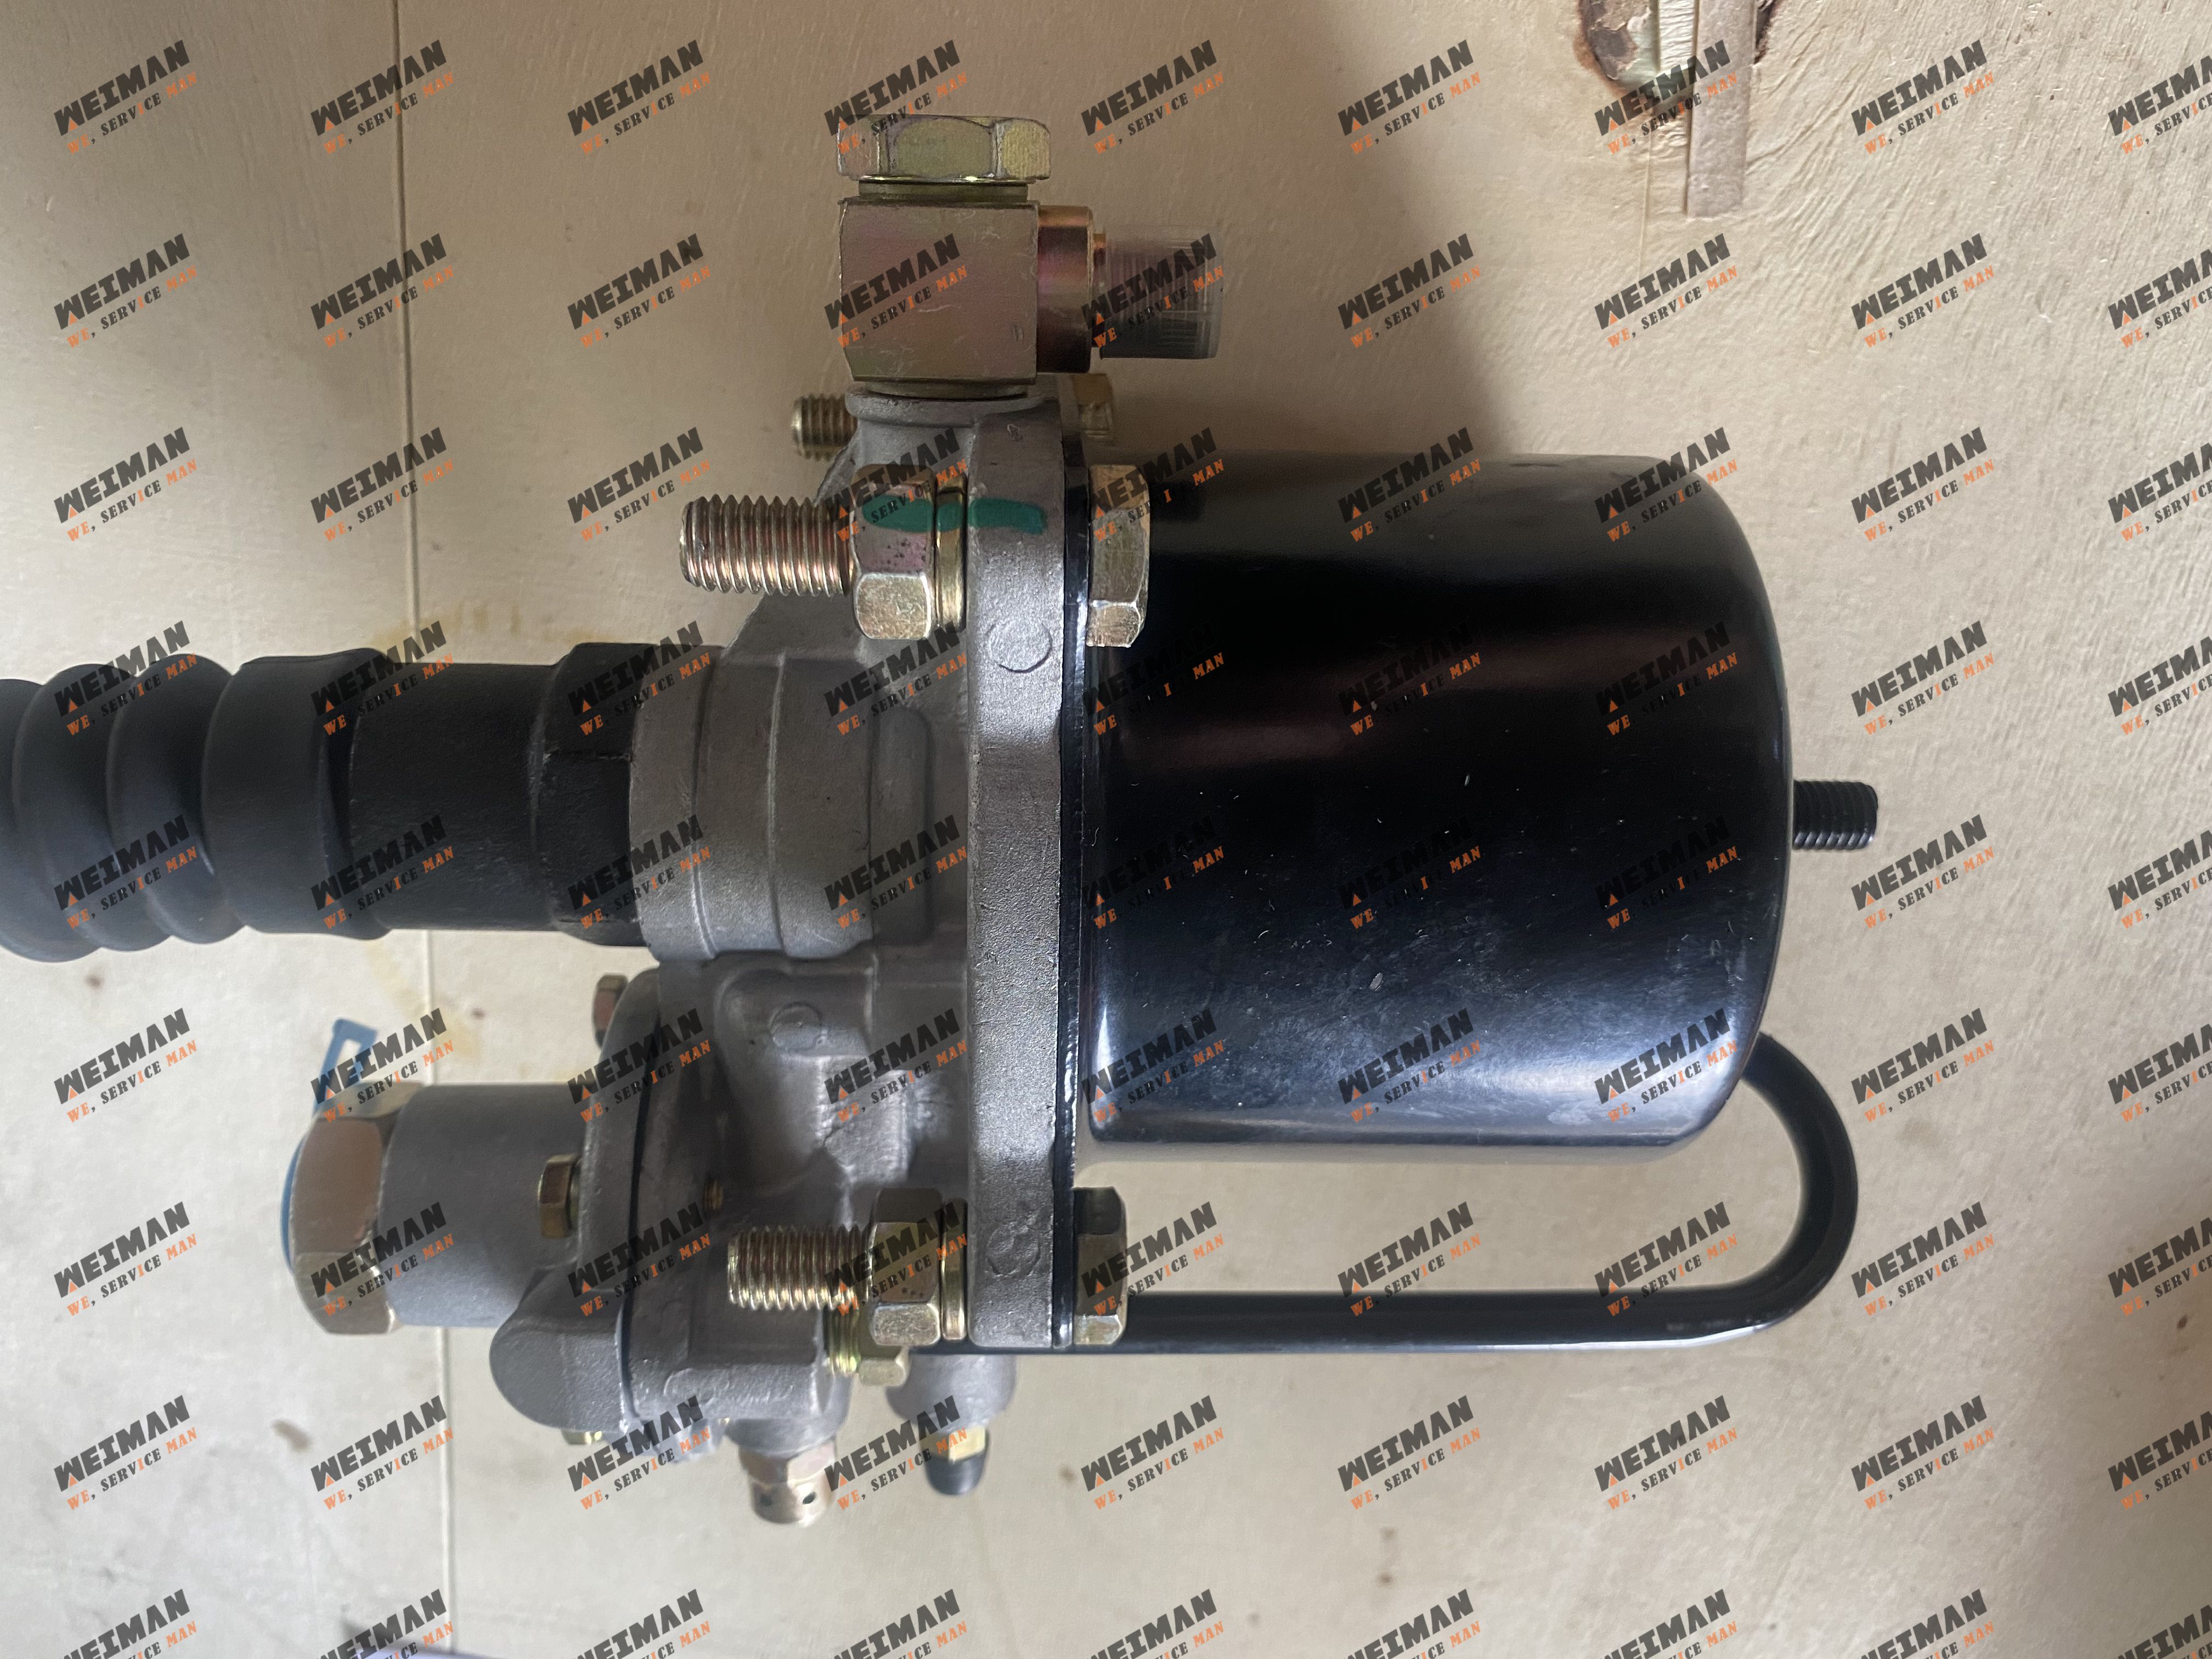 Vacuum Booster for sdlg road roller Rs8140 4190000034.